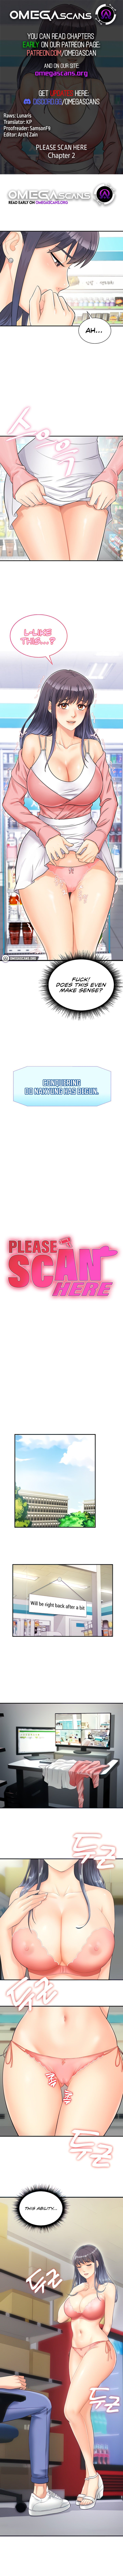 please-scan-here-chap-2-0